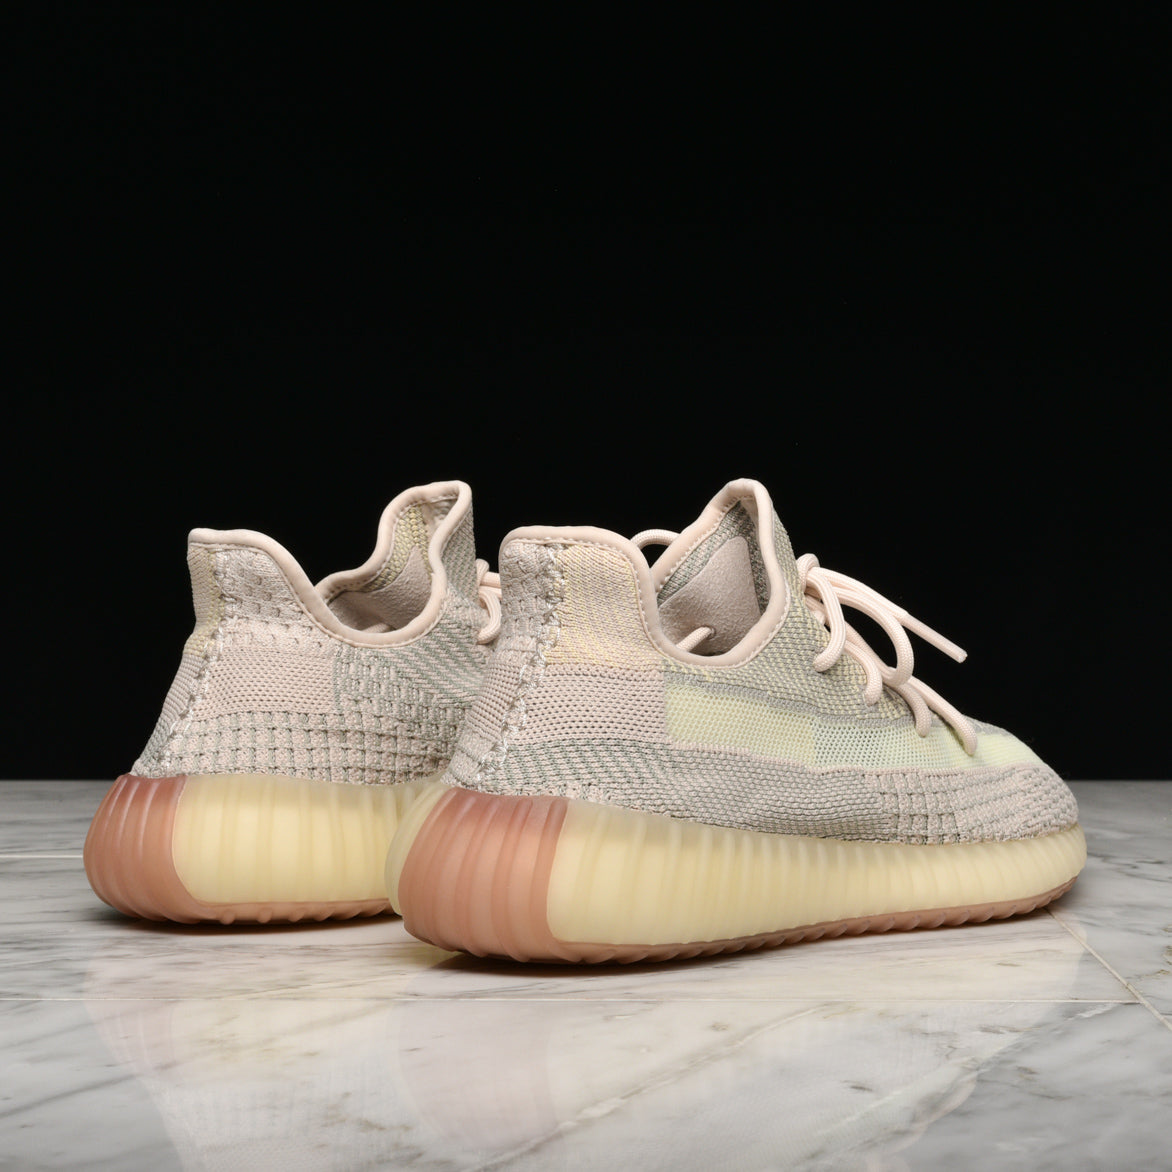 Double down. The adidas YEEZY Boost 350 V2 Citrin drops